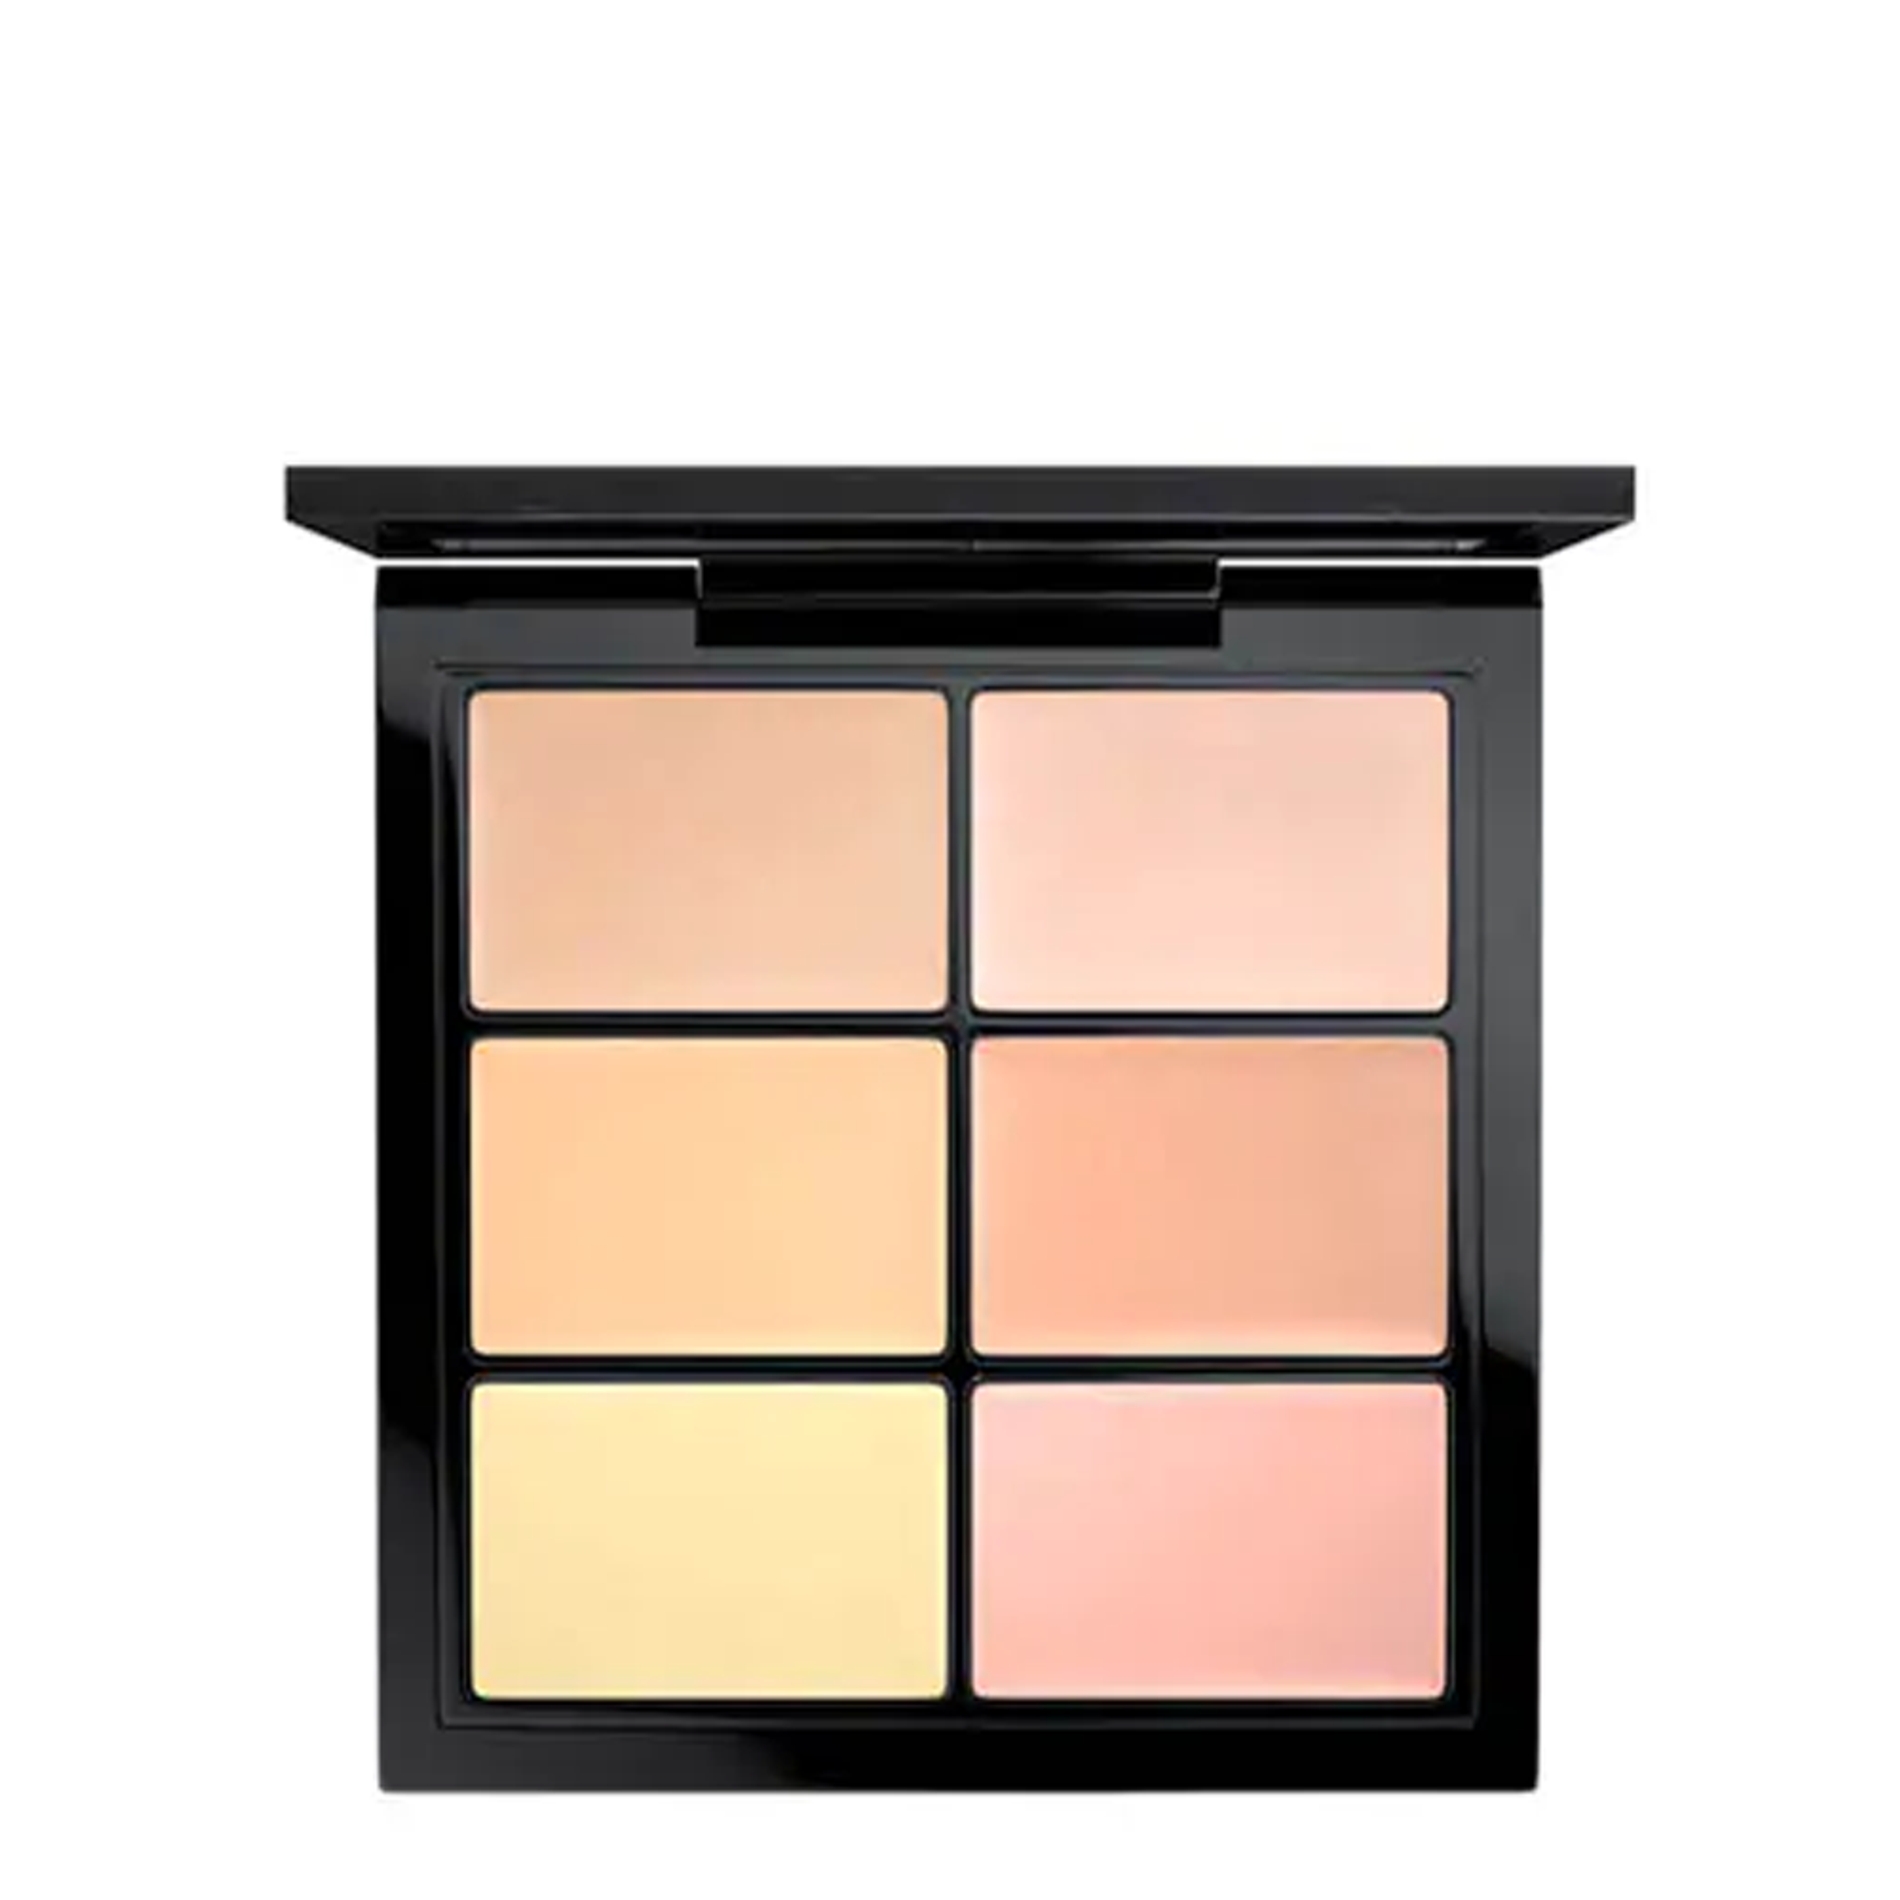 bang-che-khuyet-diem-mac-studio-conceal-and-correct-palette-6g-10